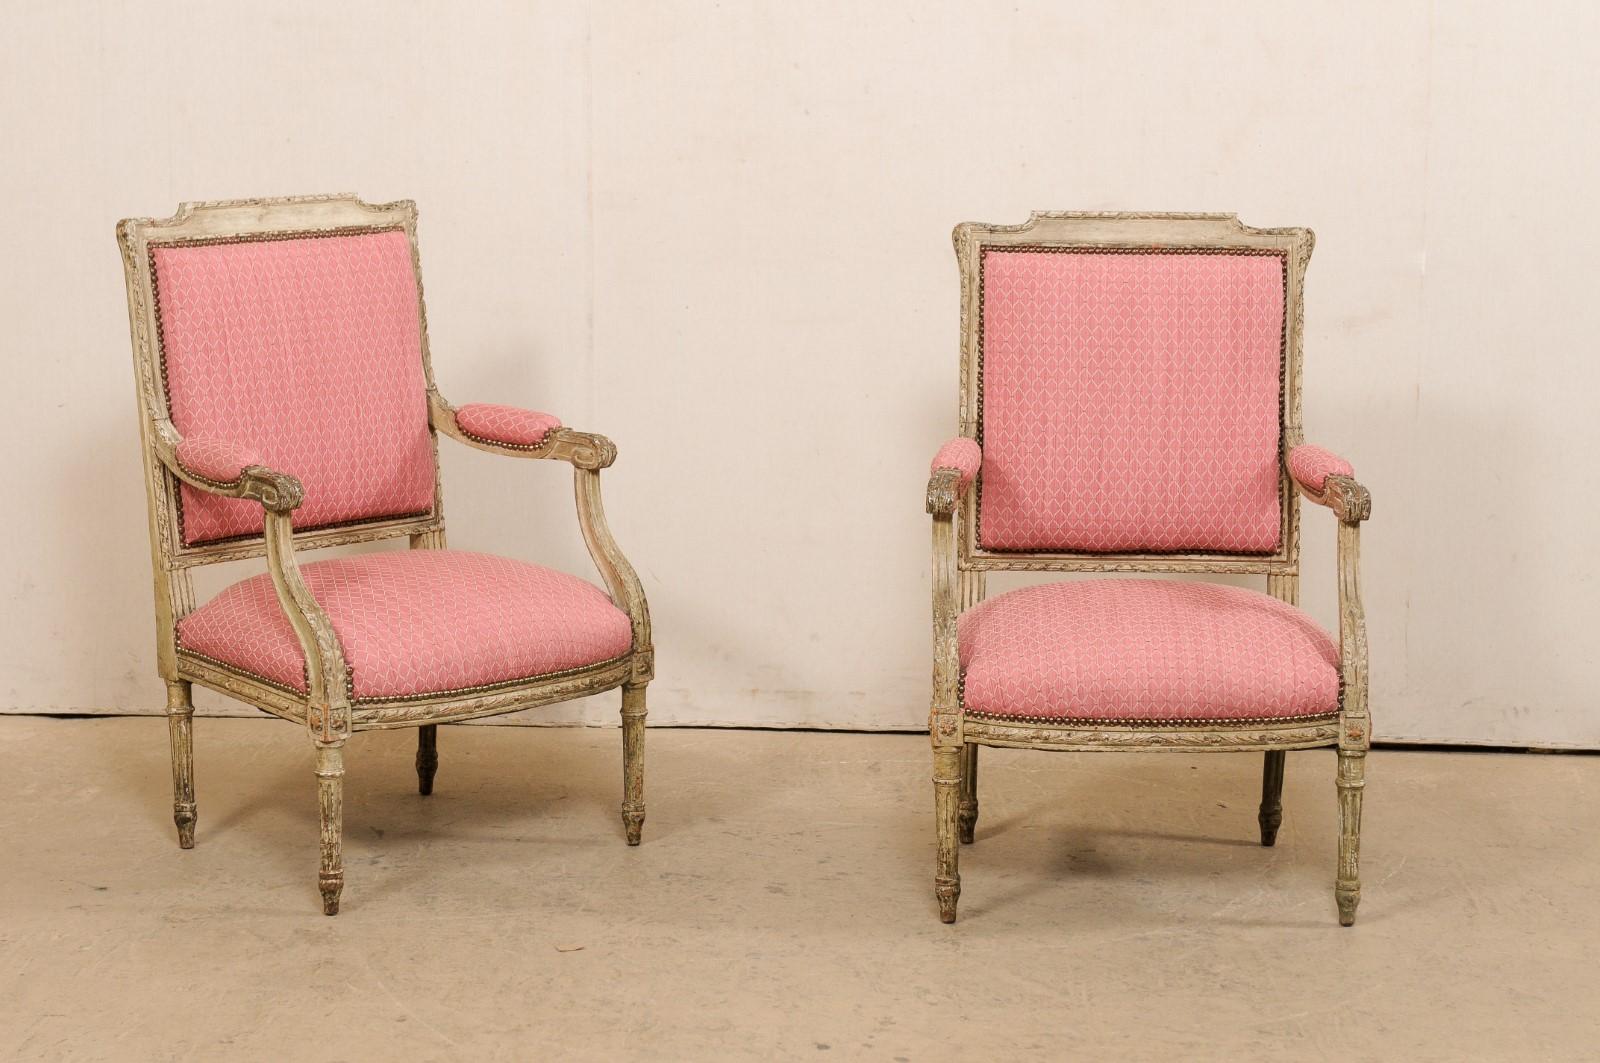 A French pair of Louis XV style, carved-wood fauteuil armchairs from the early 20th century. This antique pair of armchairs from France have upholstered backs framed within a beautifully carved wood frame edged in ribbon trim. The wooden arms, with